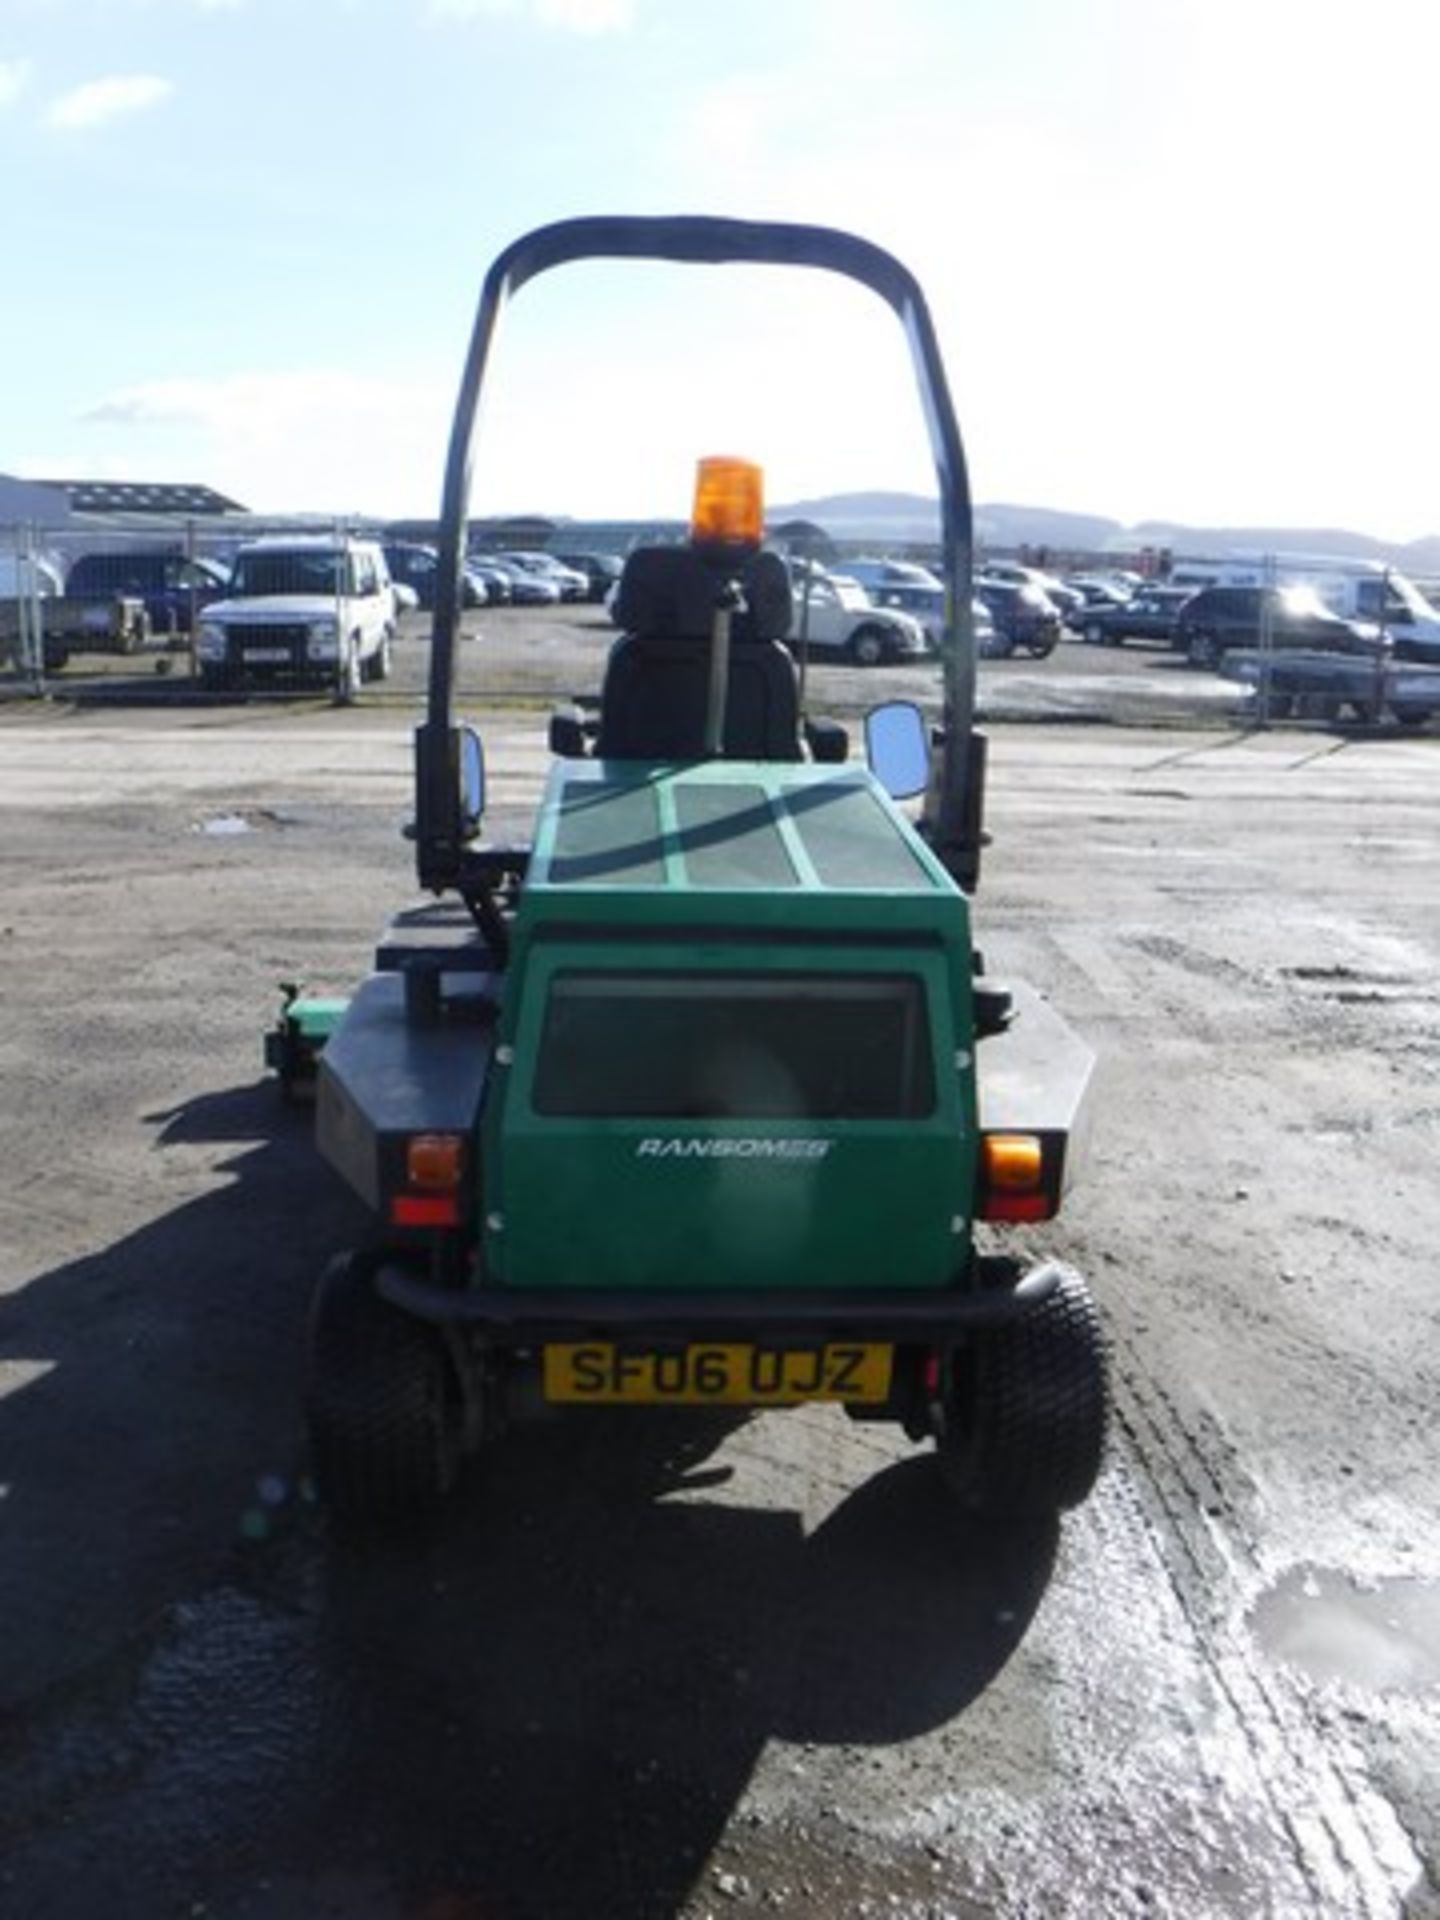 RANSOMES HIGHWAY 2120 mower. 3129 hrs (not verified) - Image 4 of 6